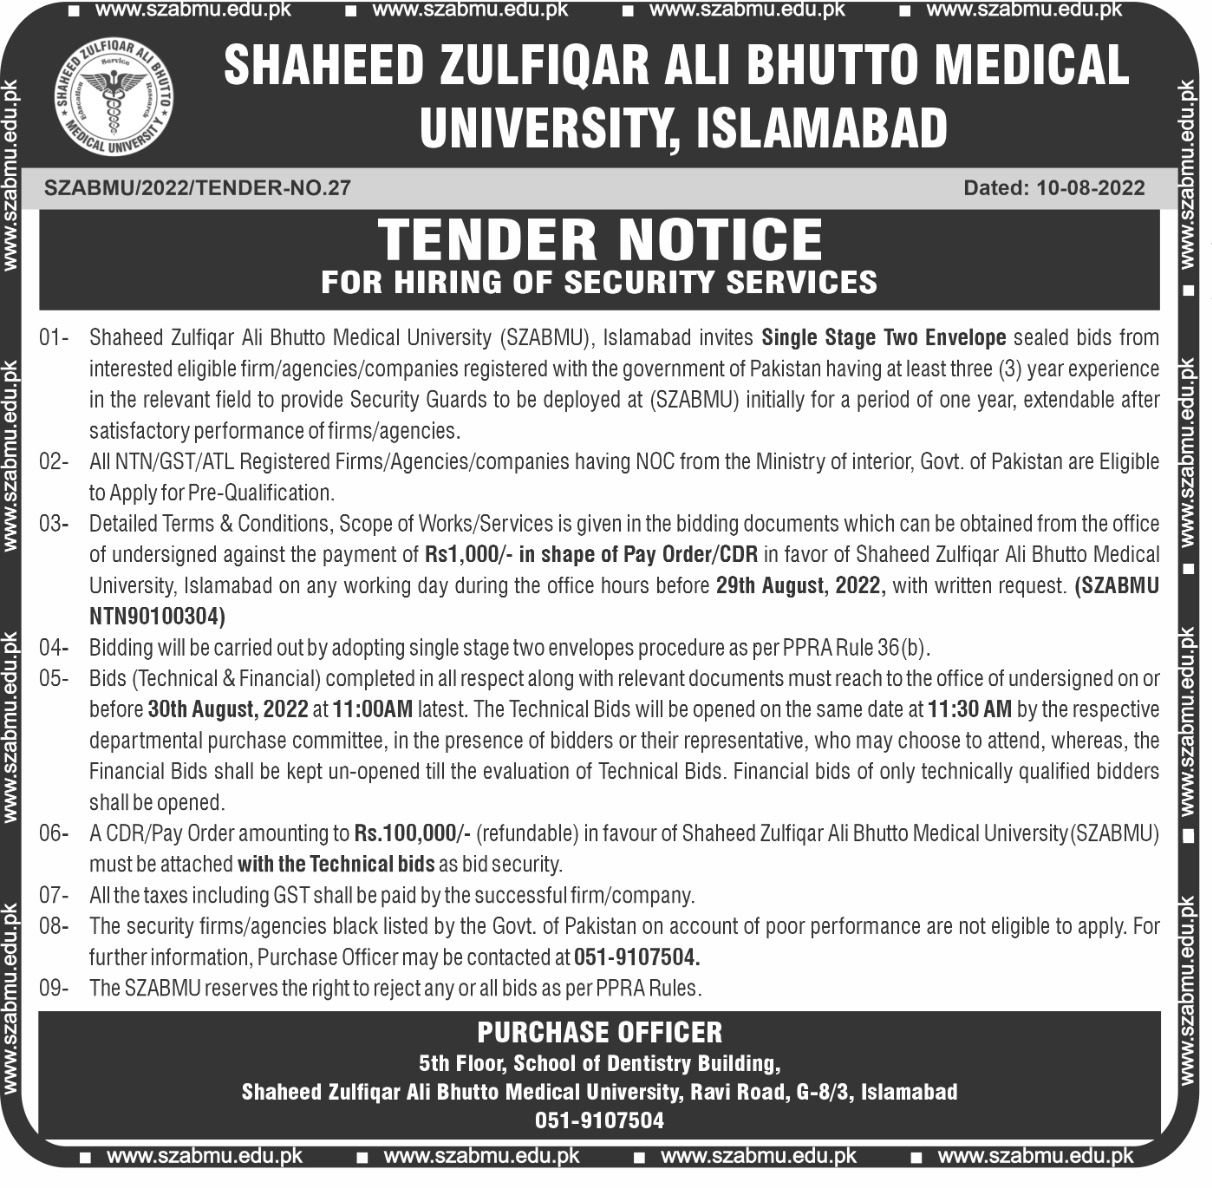 Tender Notice for Hiring of Security Services